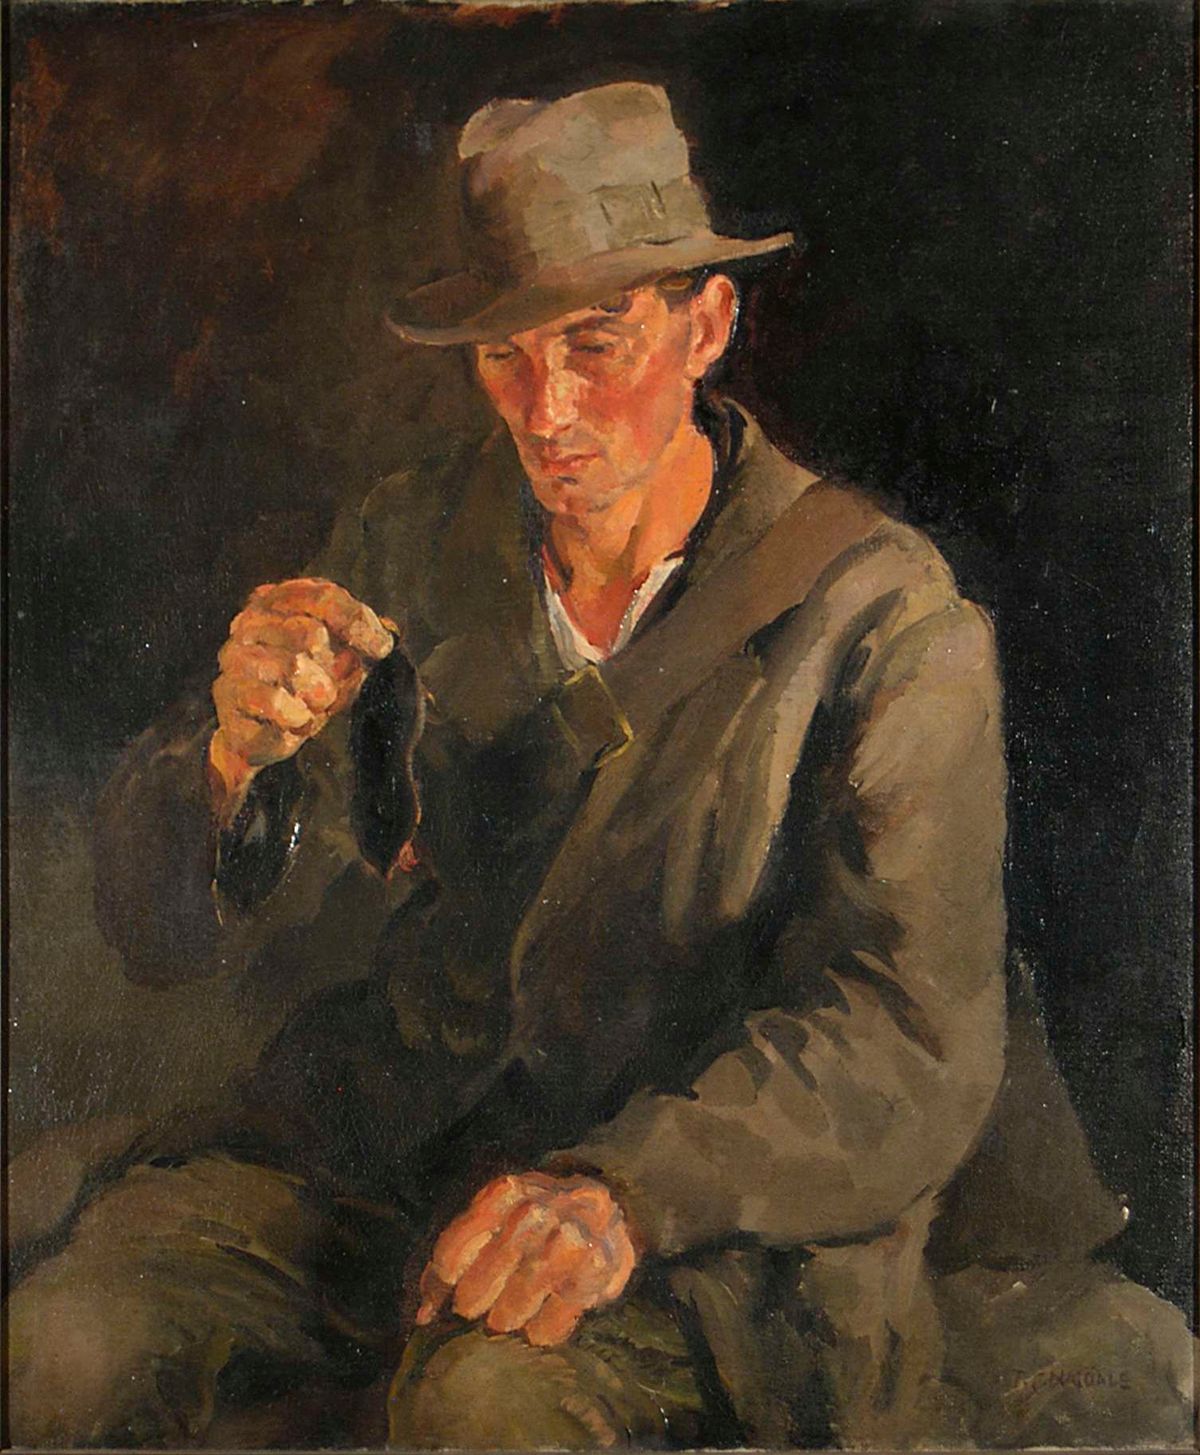 Thomas Dugdale, The Mole Catcher courtesy UK Government Art Collection, DCMS